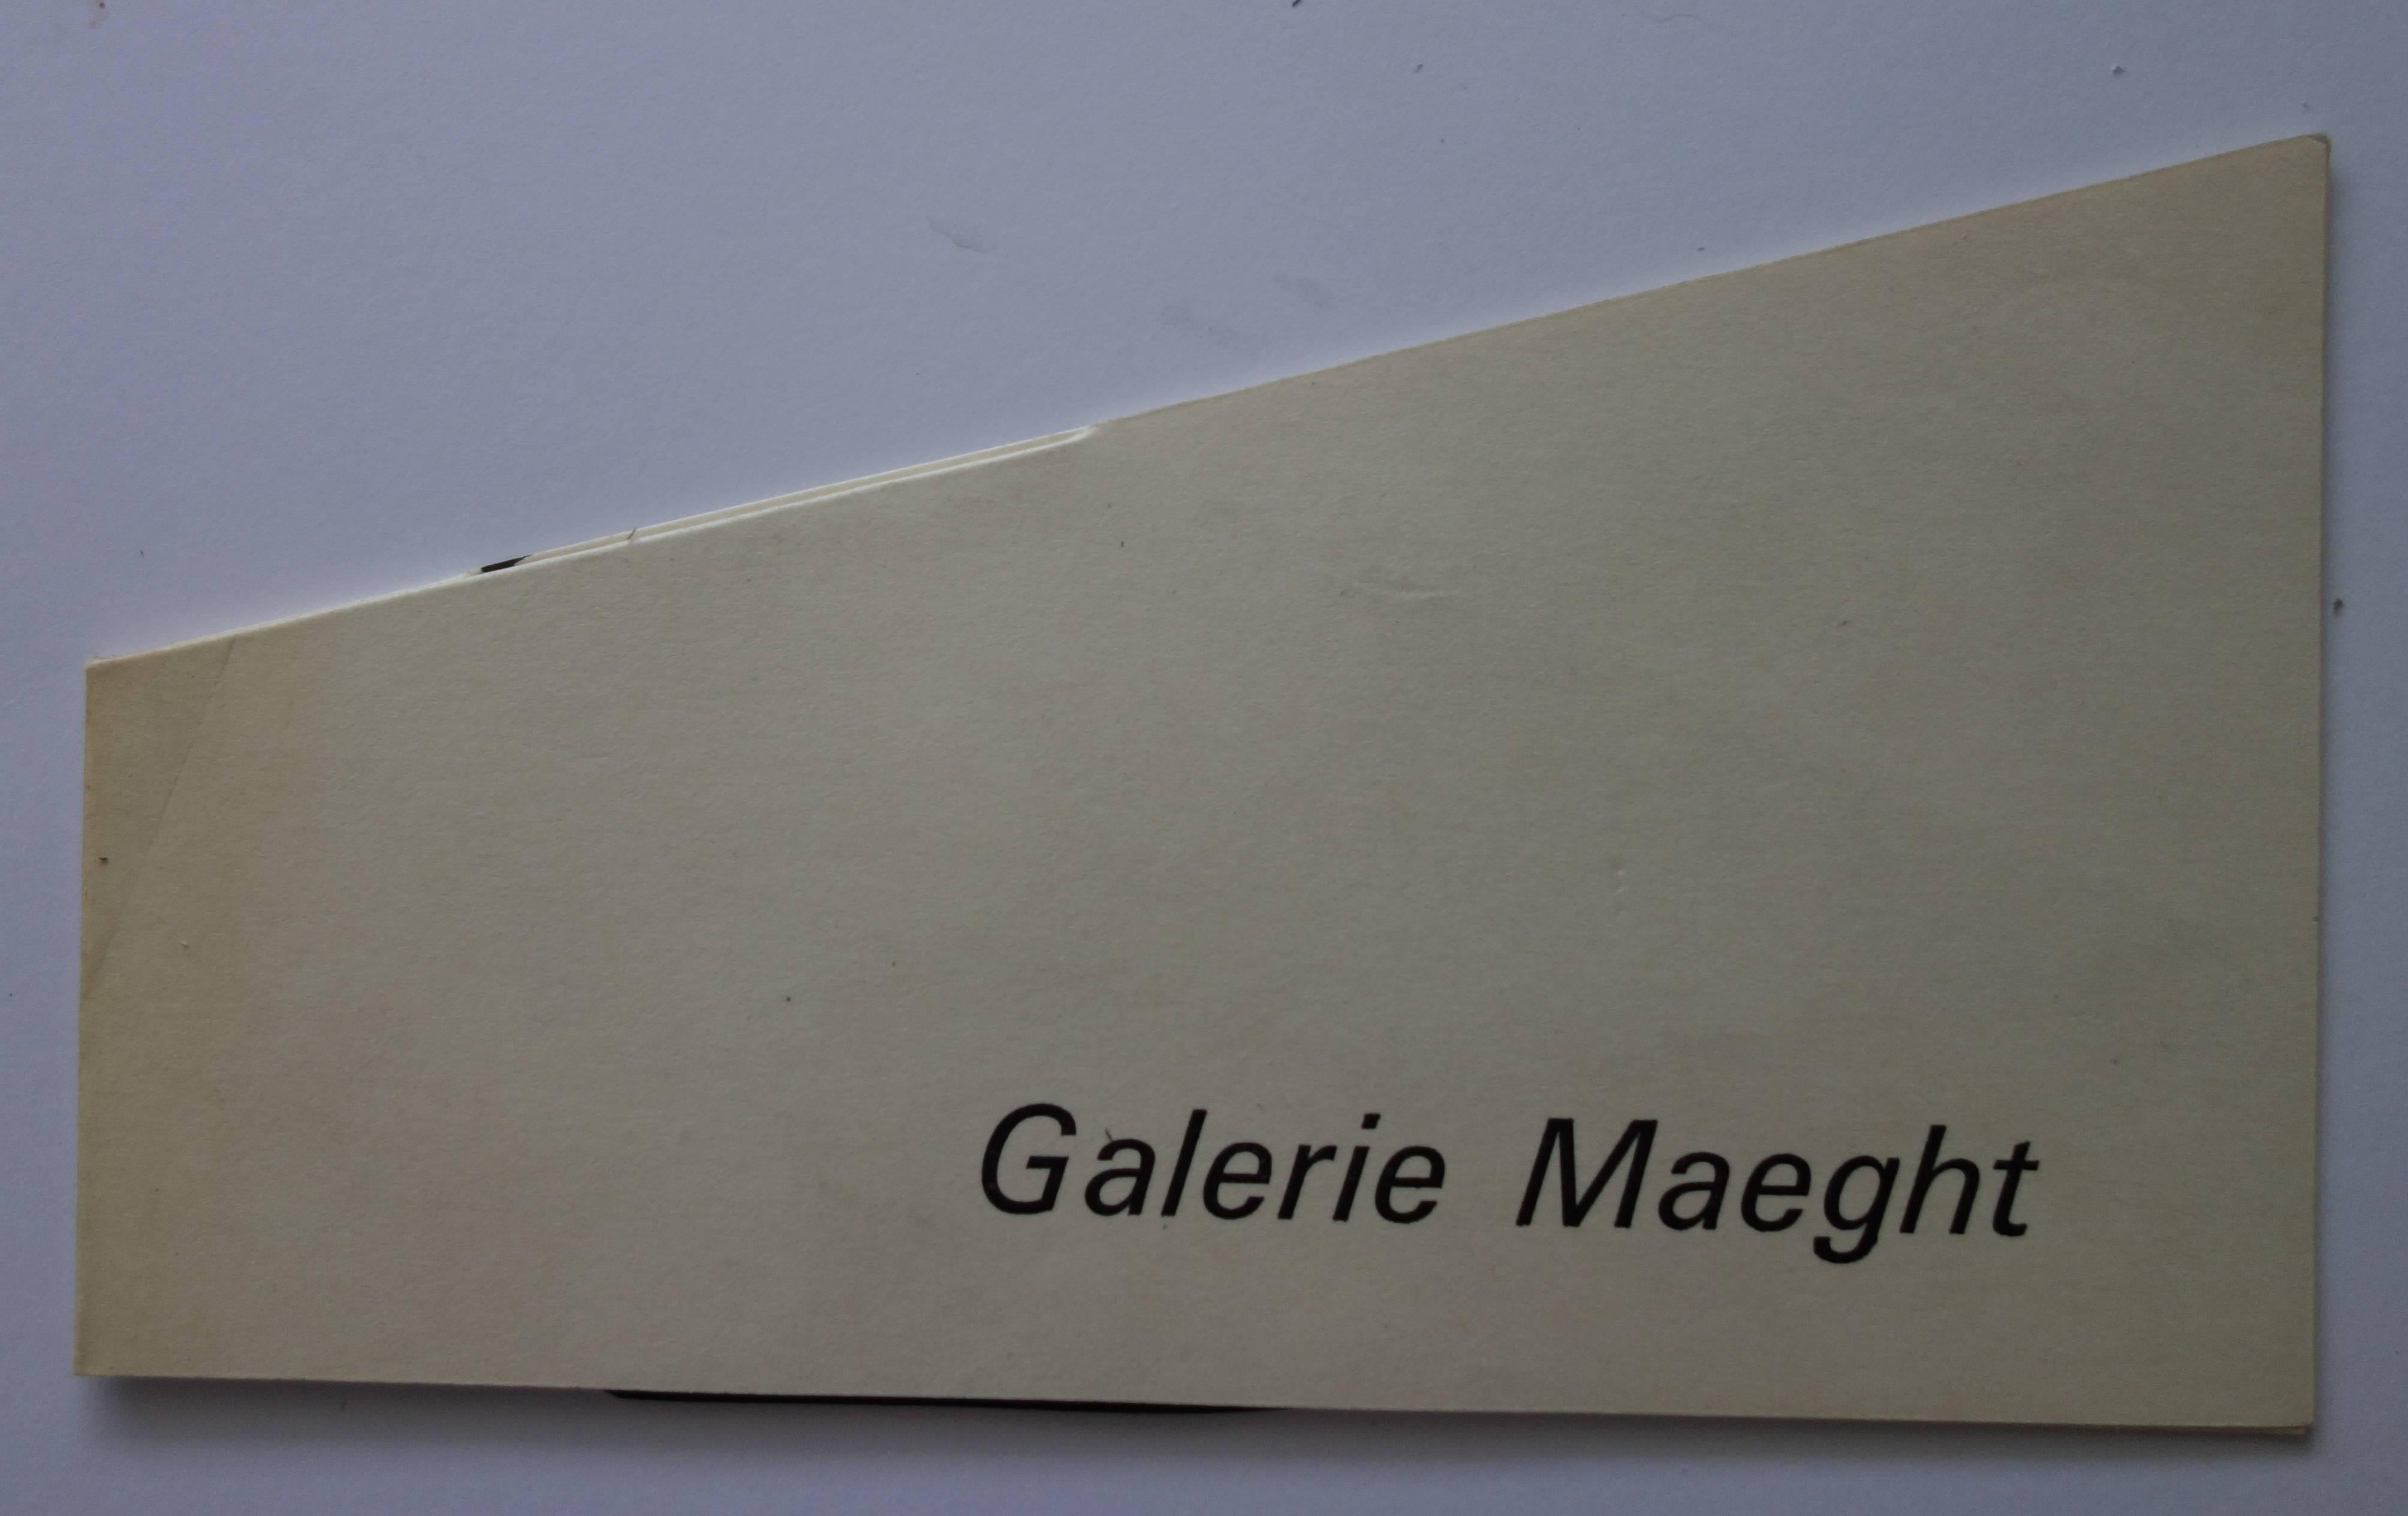 Stabiles - Original lithographic pop-up card - Plate signed - Maeght 1963 - American Modern Print by Alexander Calder